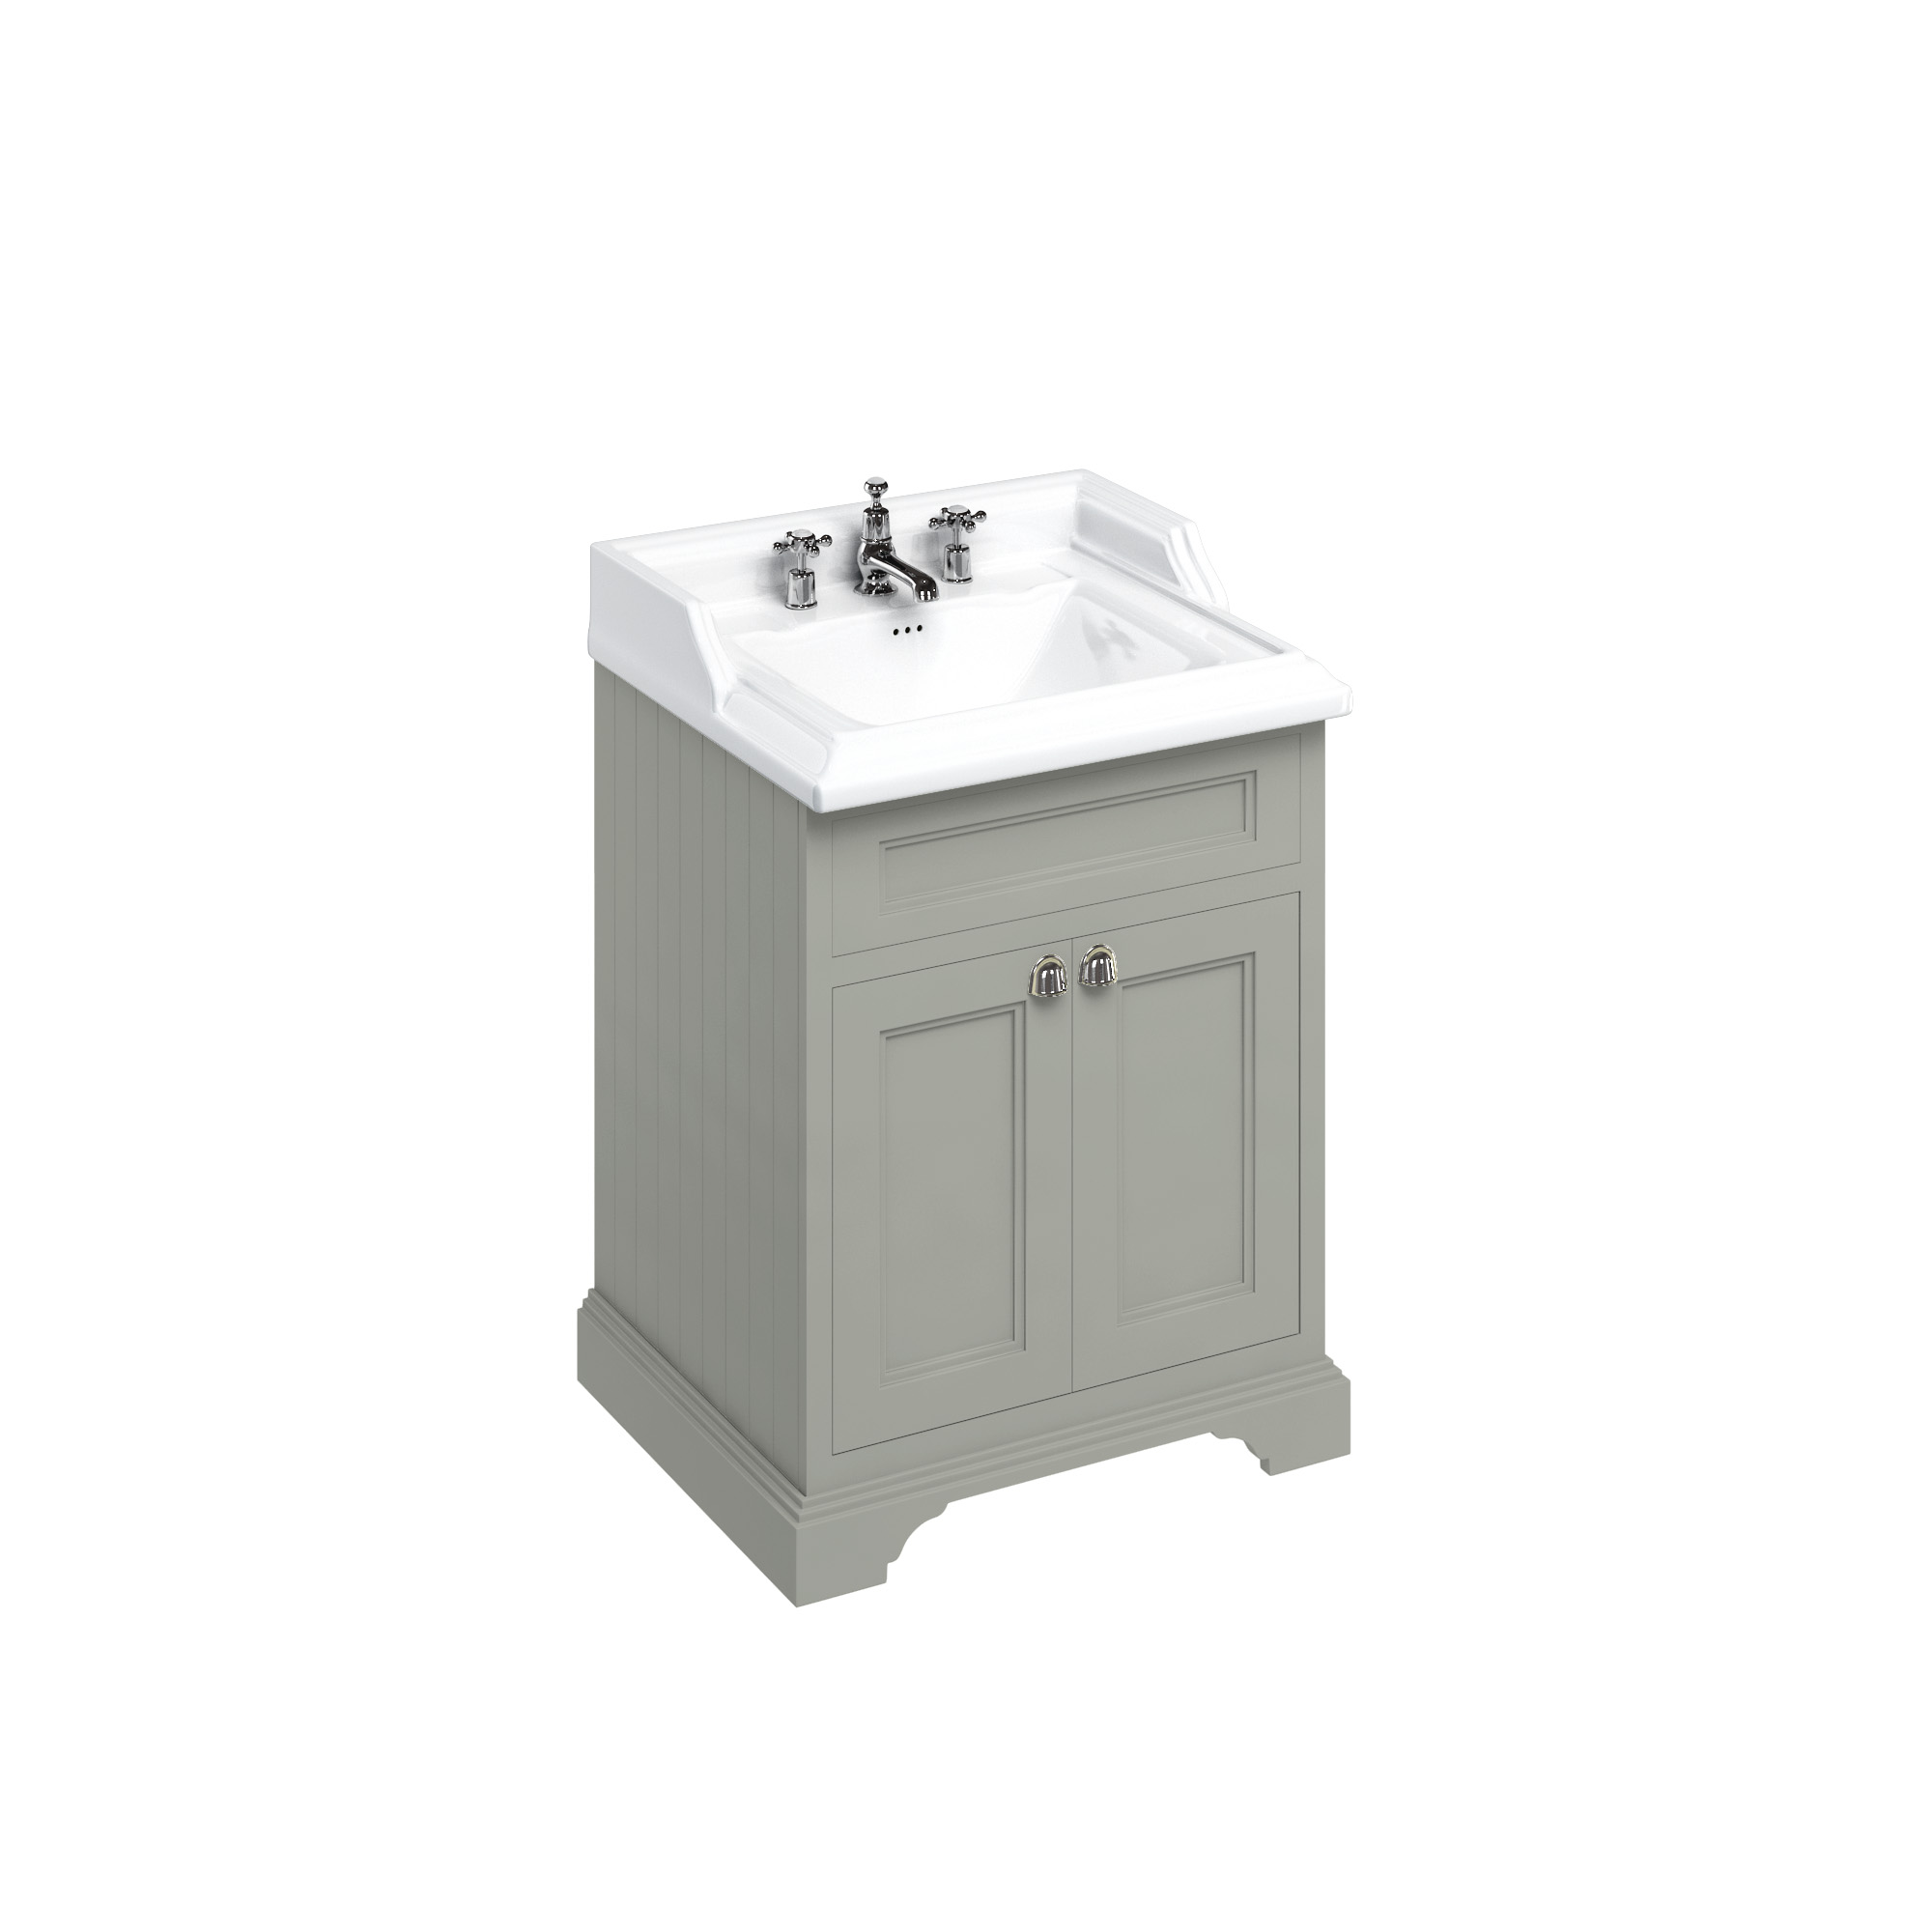 Freestanding 65 Vanity Unit with doors - Dark Olive and Classic basin 3 tap holes